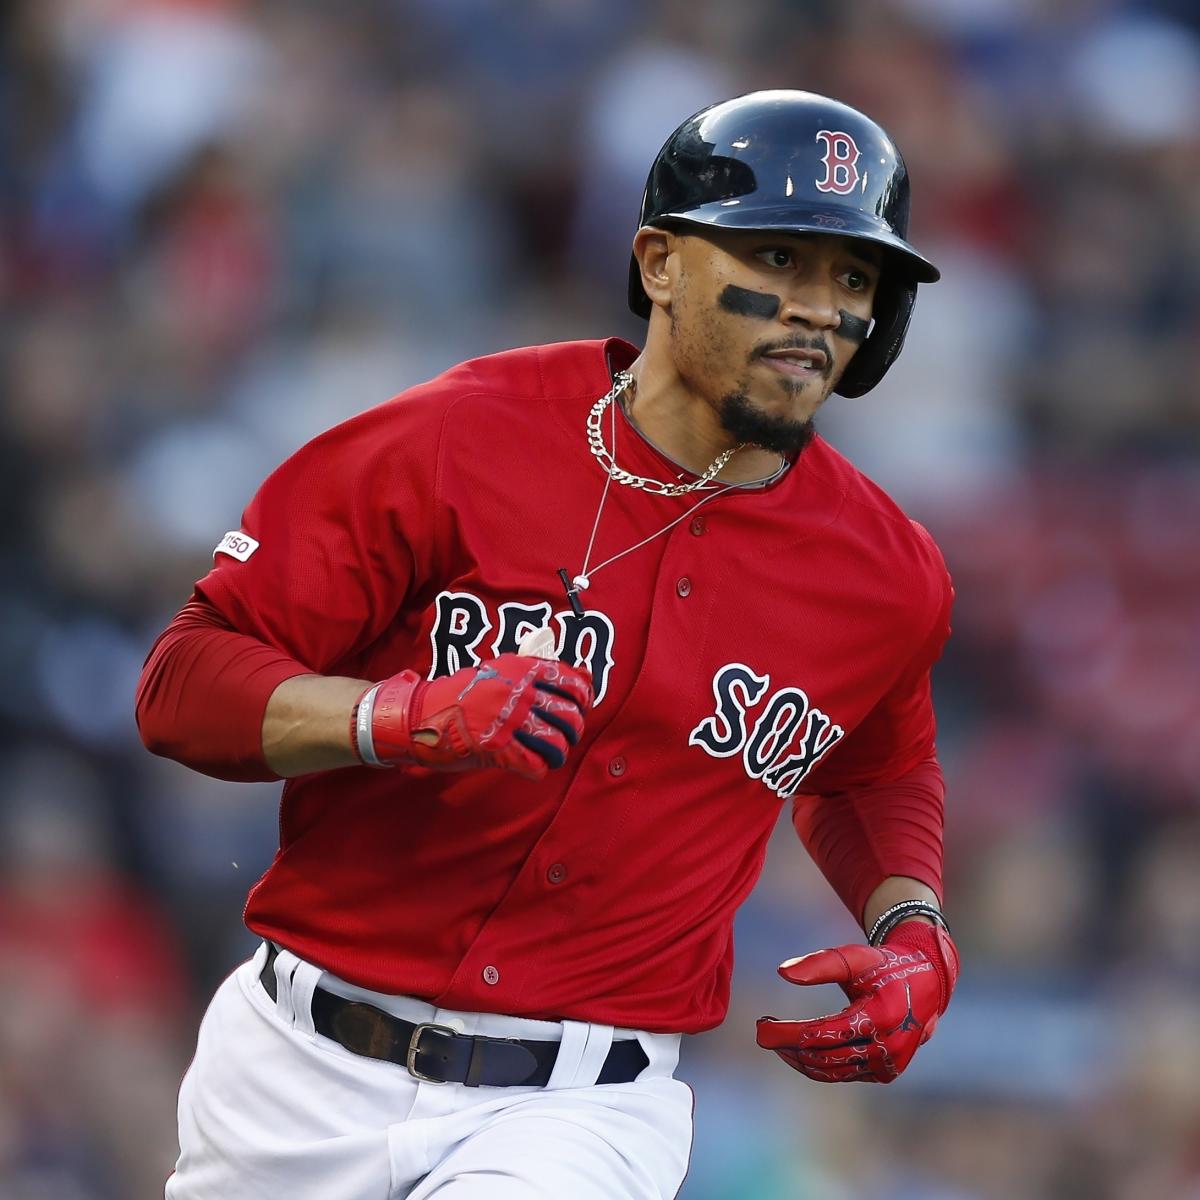 Mookie Betts does it again! Red Sox win in dramatic fashion